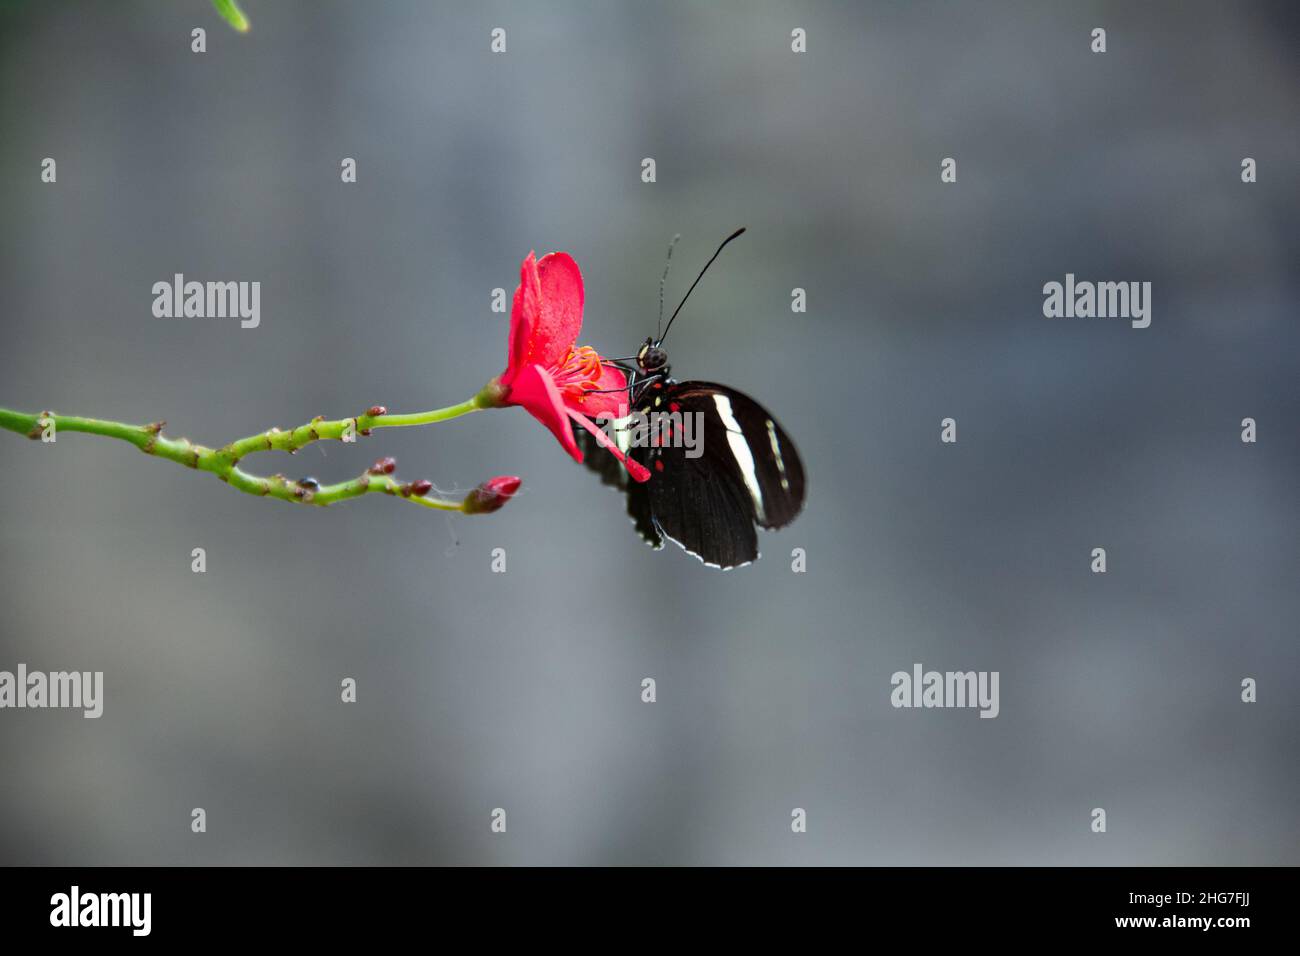 White Striped Black Butterly on a Small  Red Flower in Costa Rica Rainforest Stock Photo